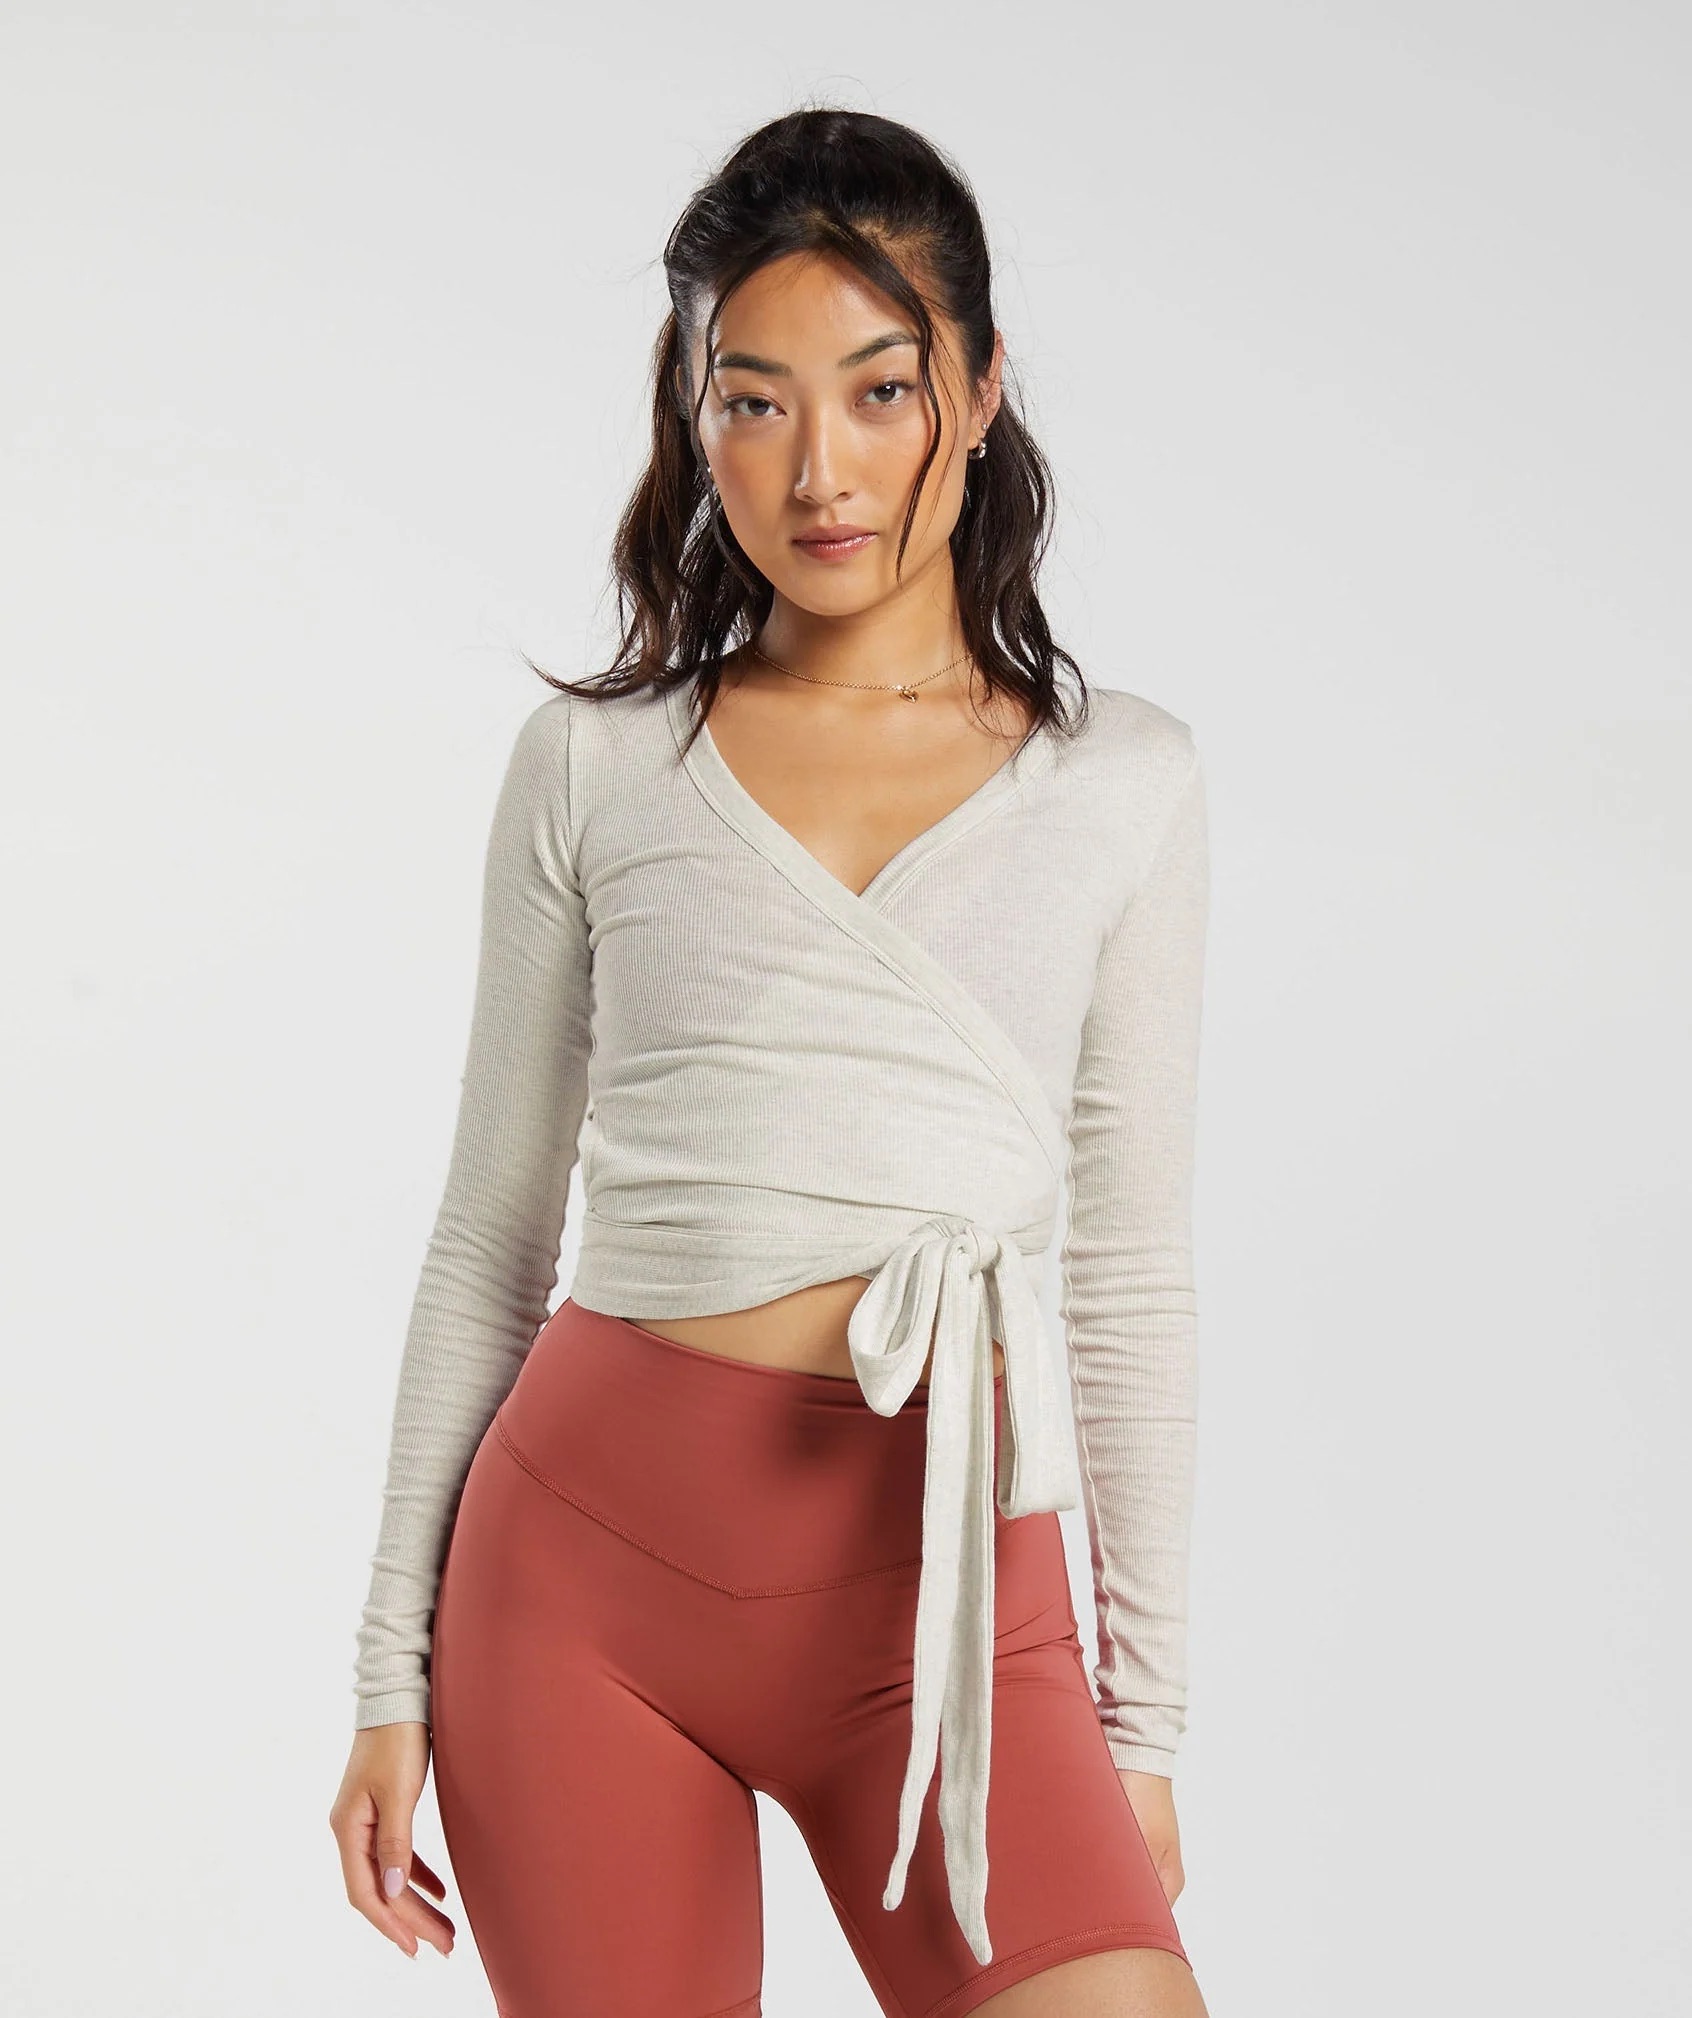 Model in Elevate Wrap Top | Barre Gift Guide